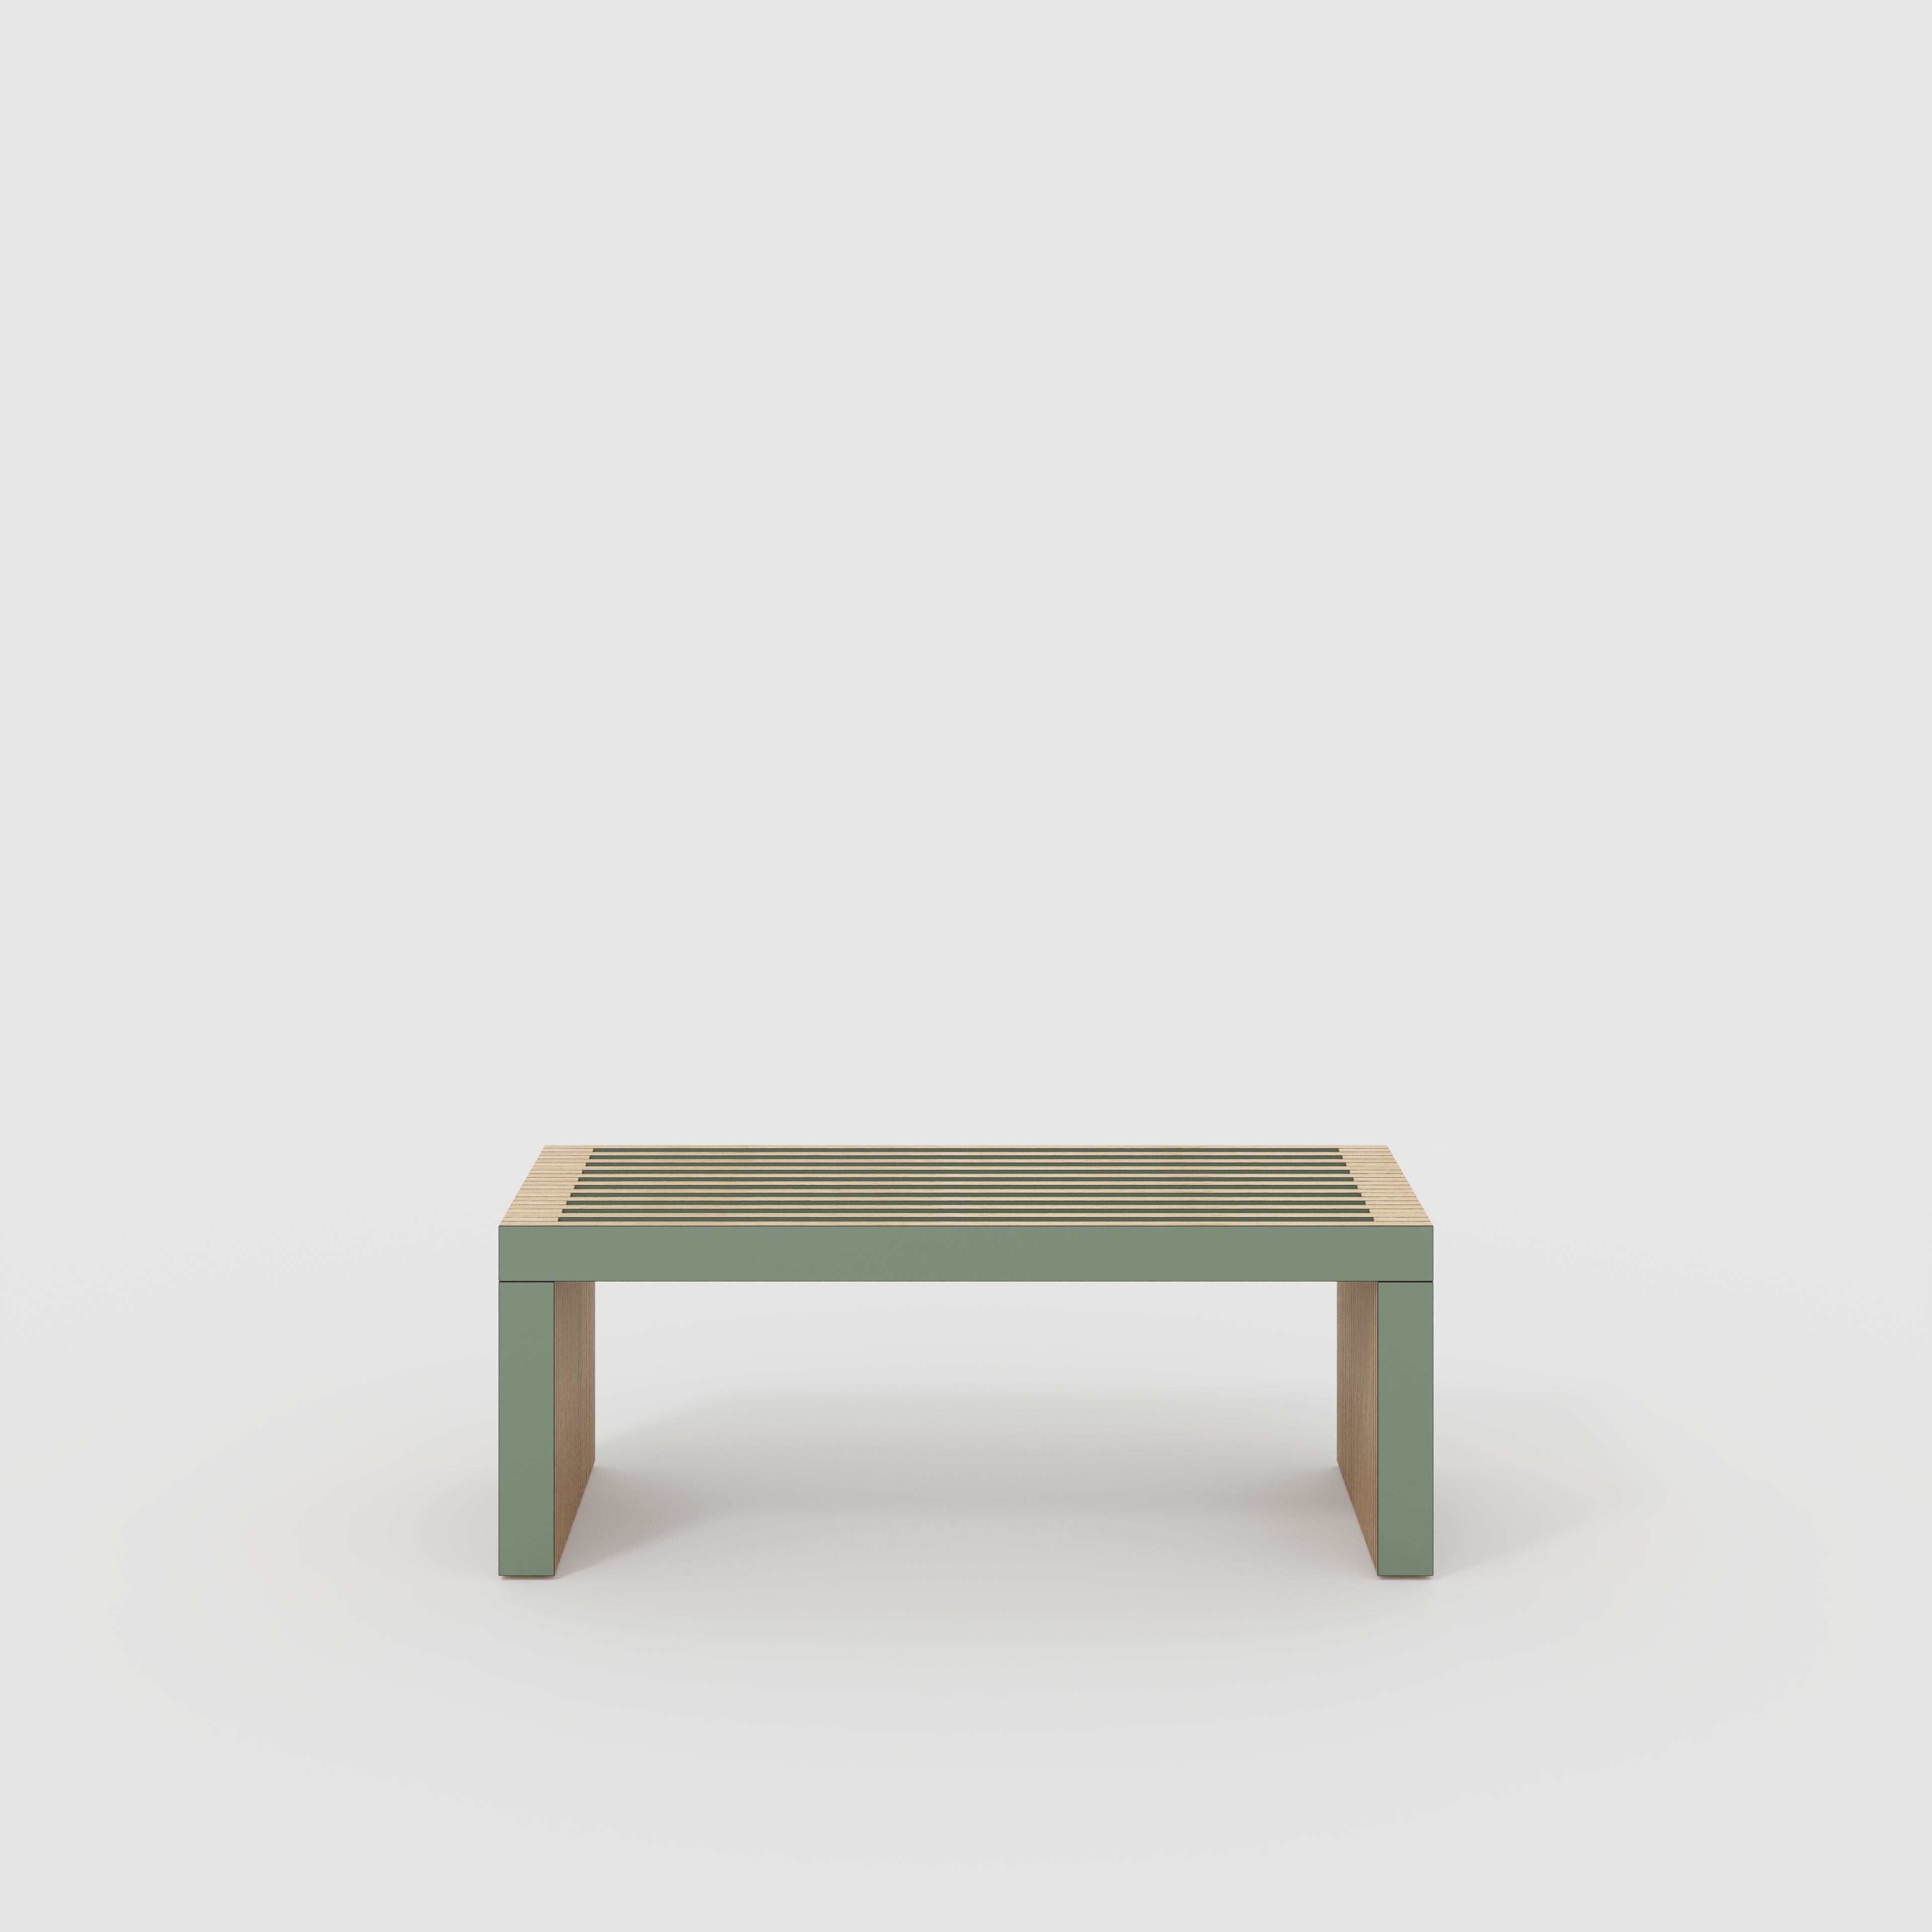 Bench Seat with Slats - Formica Green Slate - 1200(w) x 410(d) x 450(h)